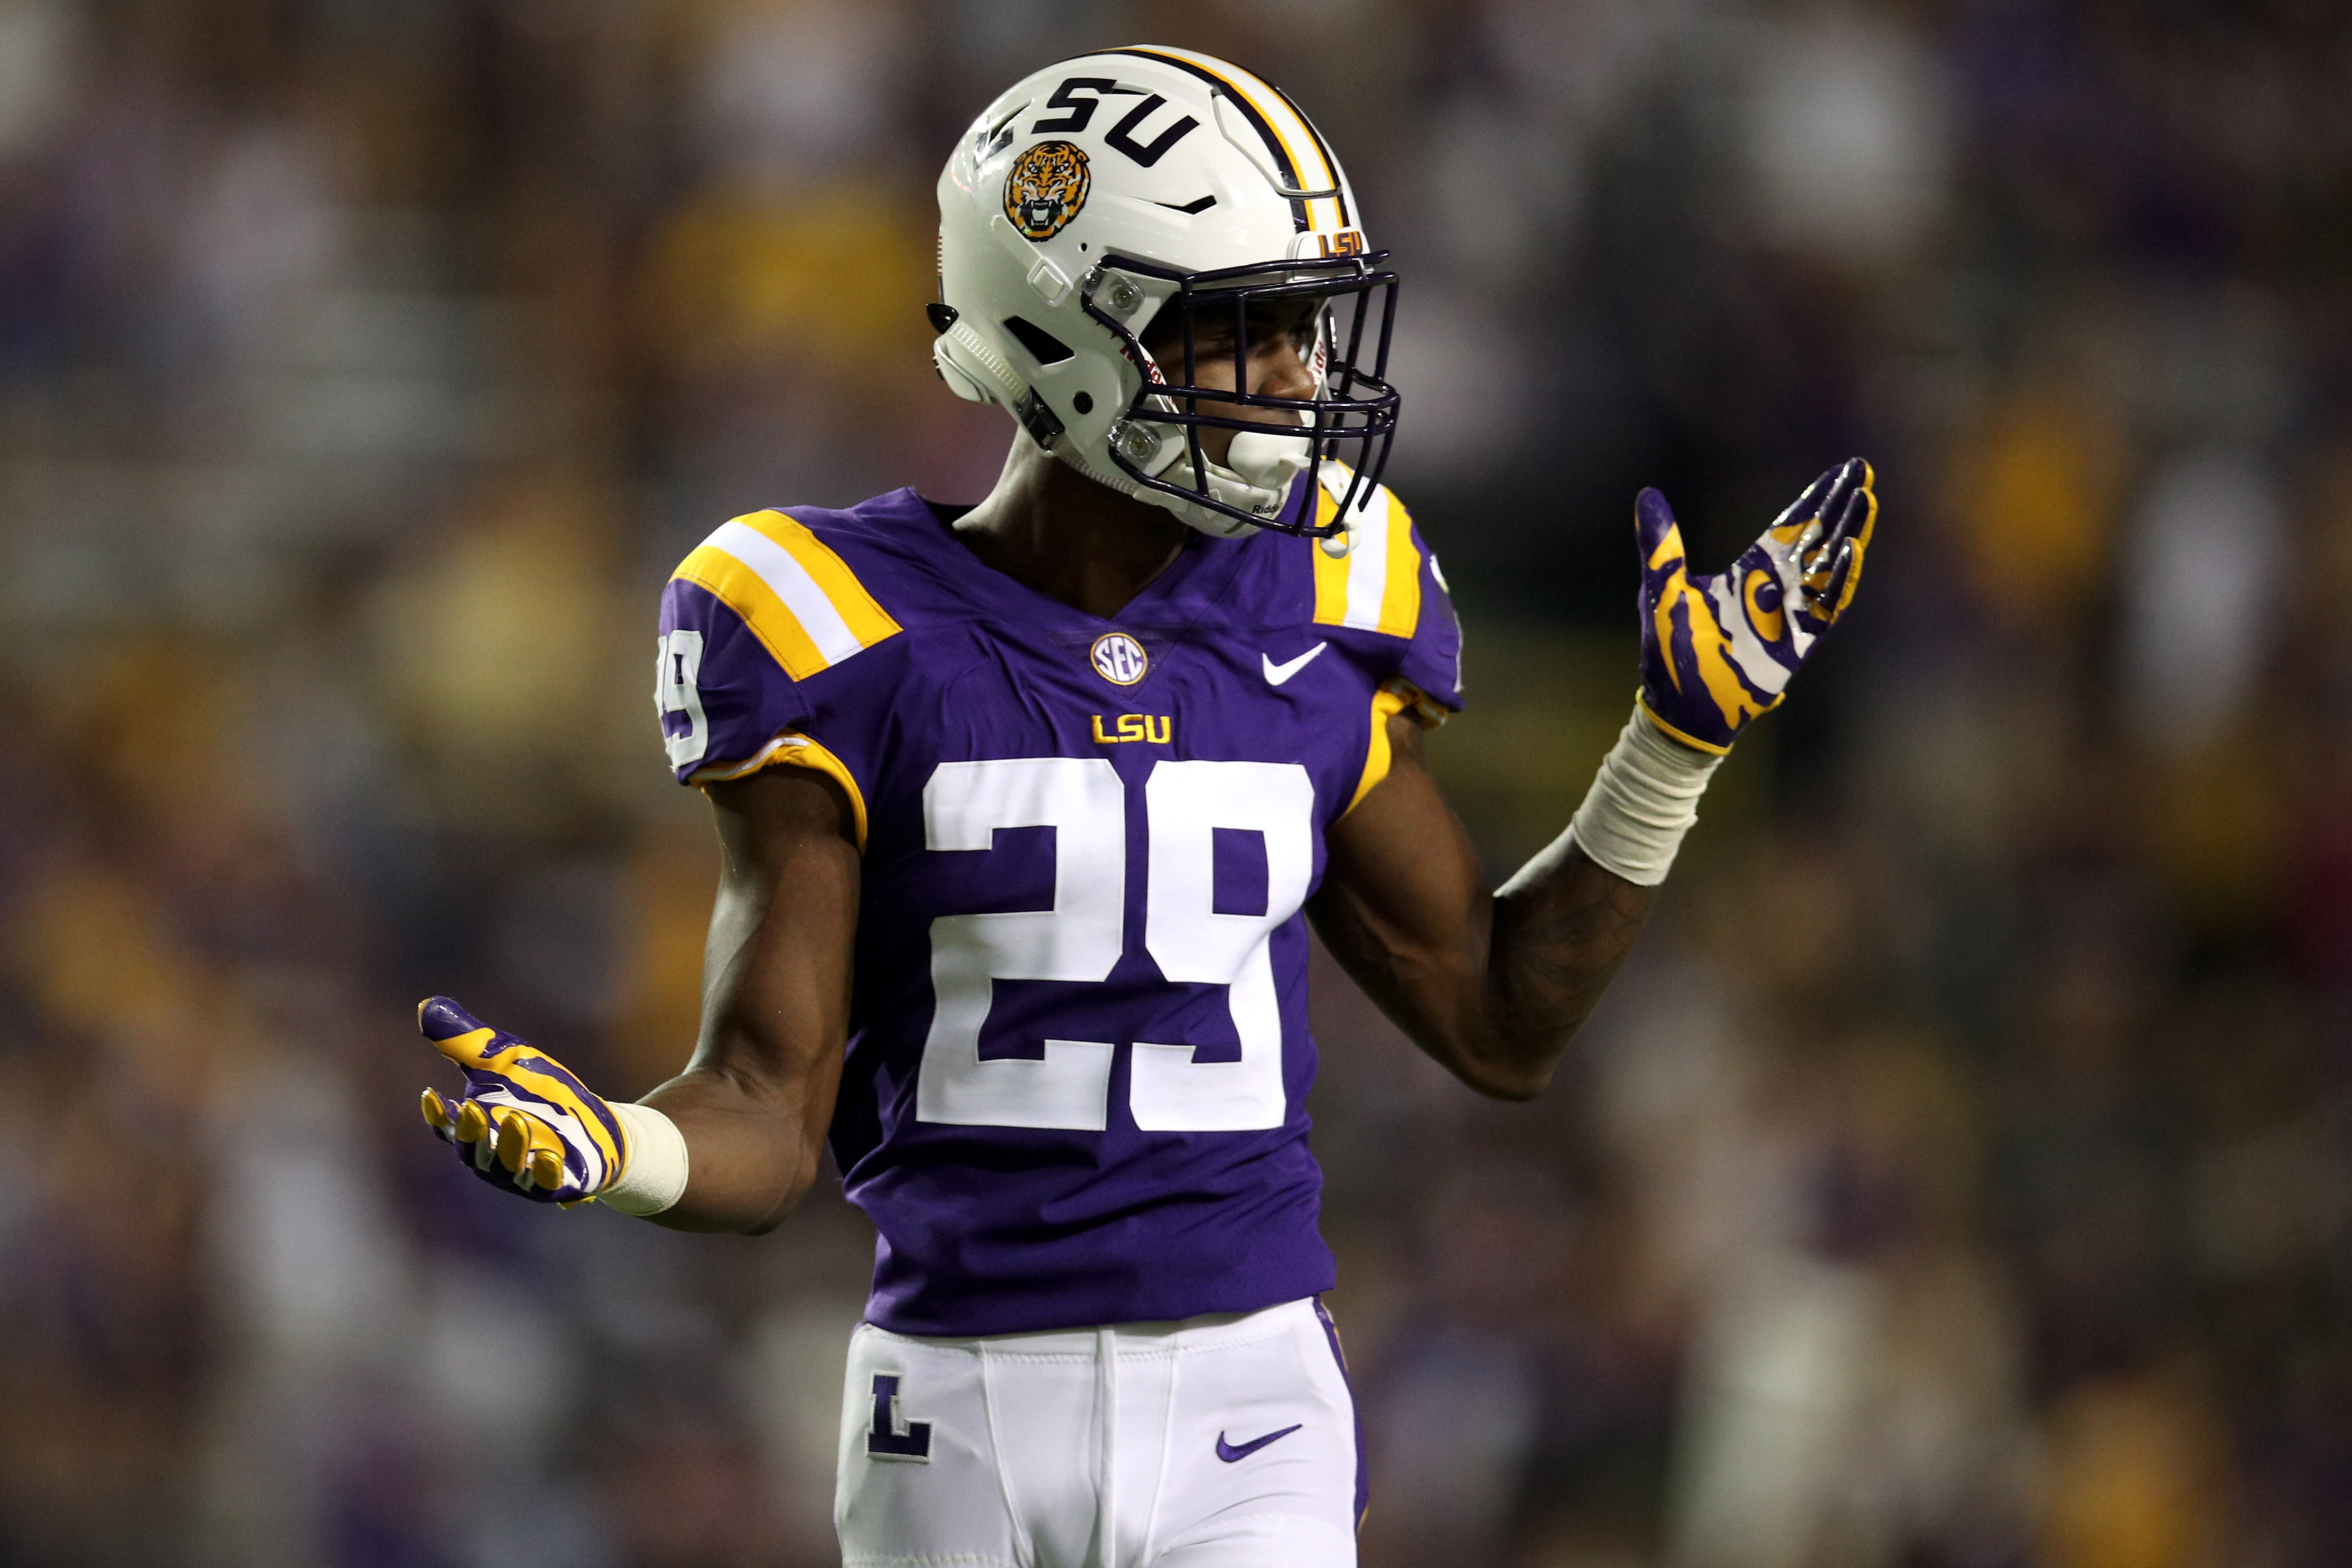 SEC analyst Booger McFarland on why LSU needs Danny Etling to start, what  Les Miles owes fans, LSU